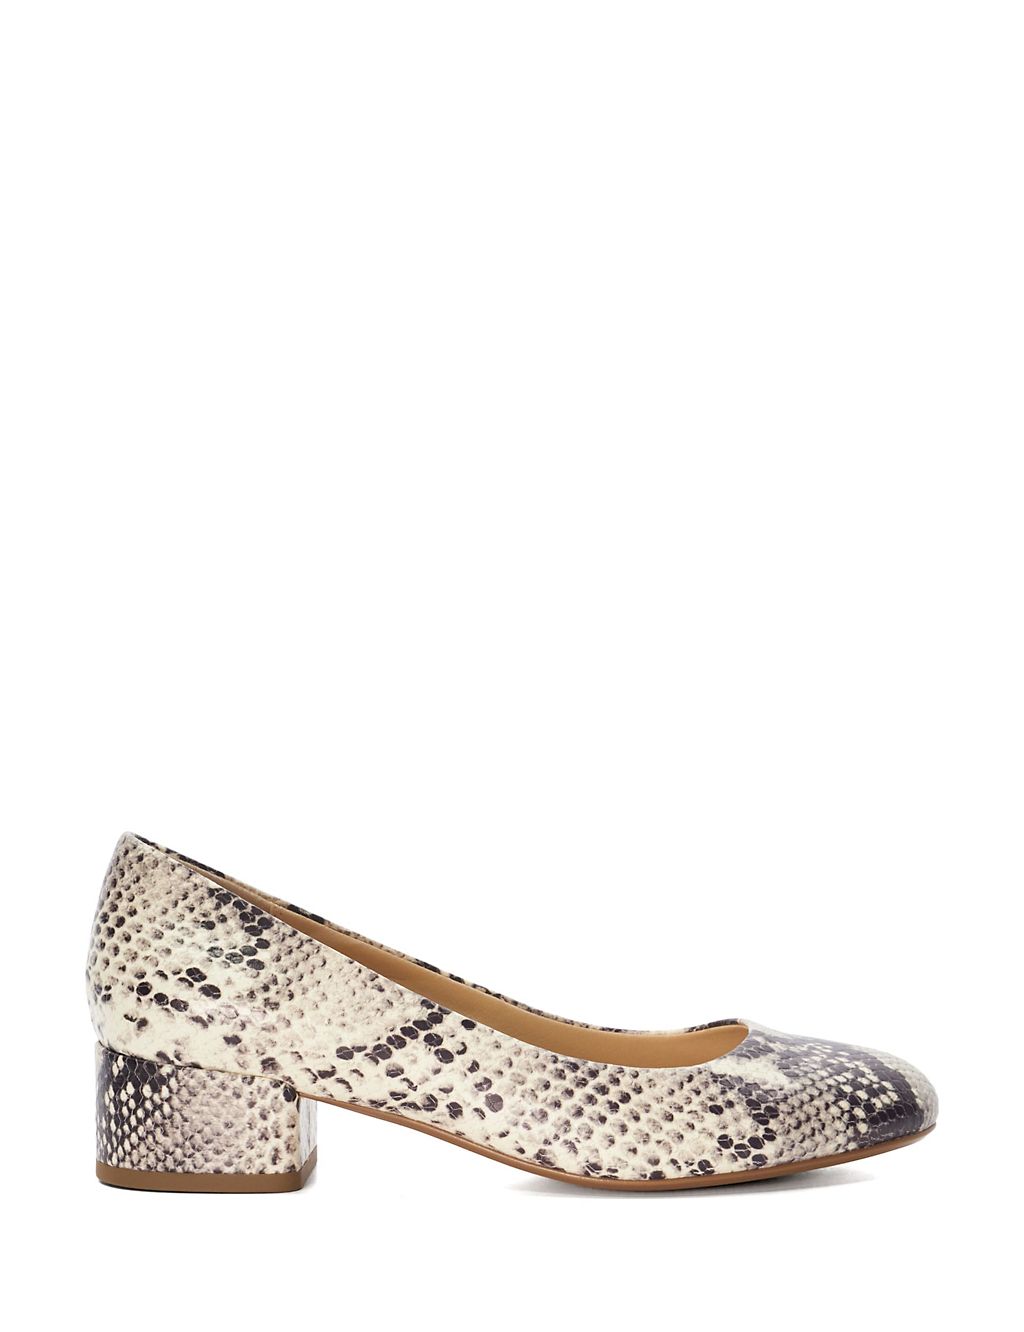 Leather Animal Print Block Heel Court Shoes 3 of 5